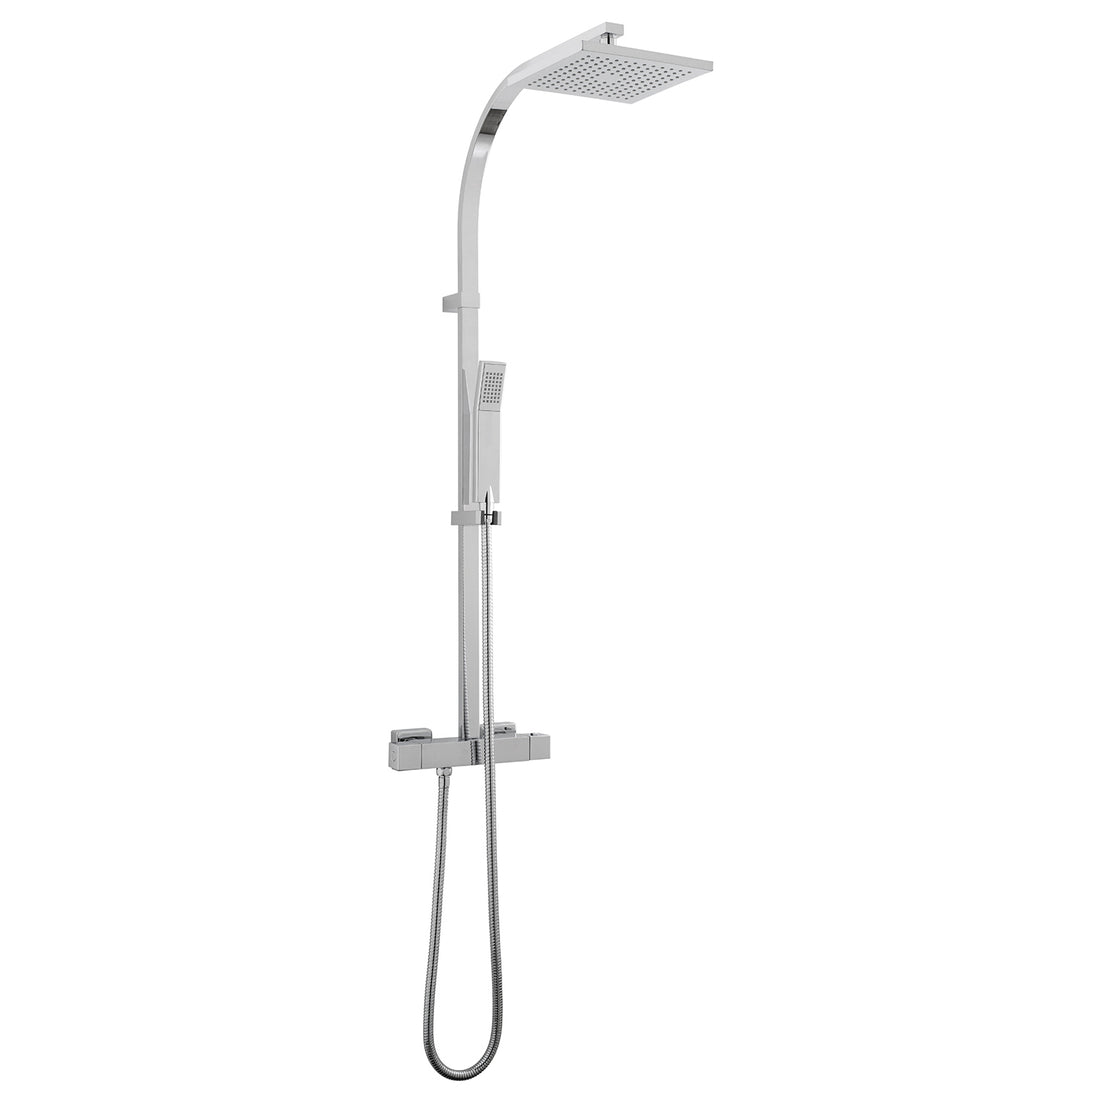 Vado Velo Square thermostatic shower valve with integrated diverter and rigid riser with single function shower head and shower handset